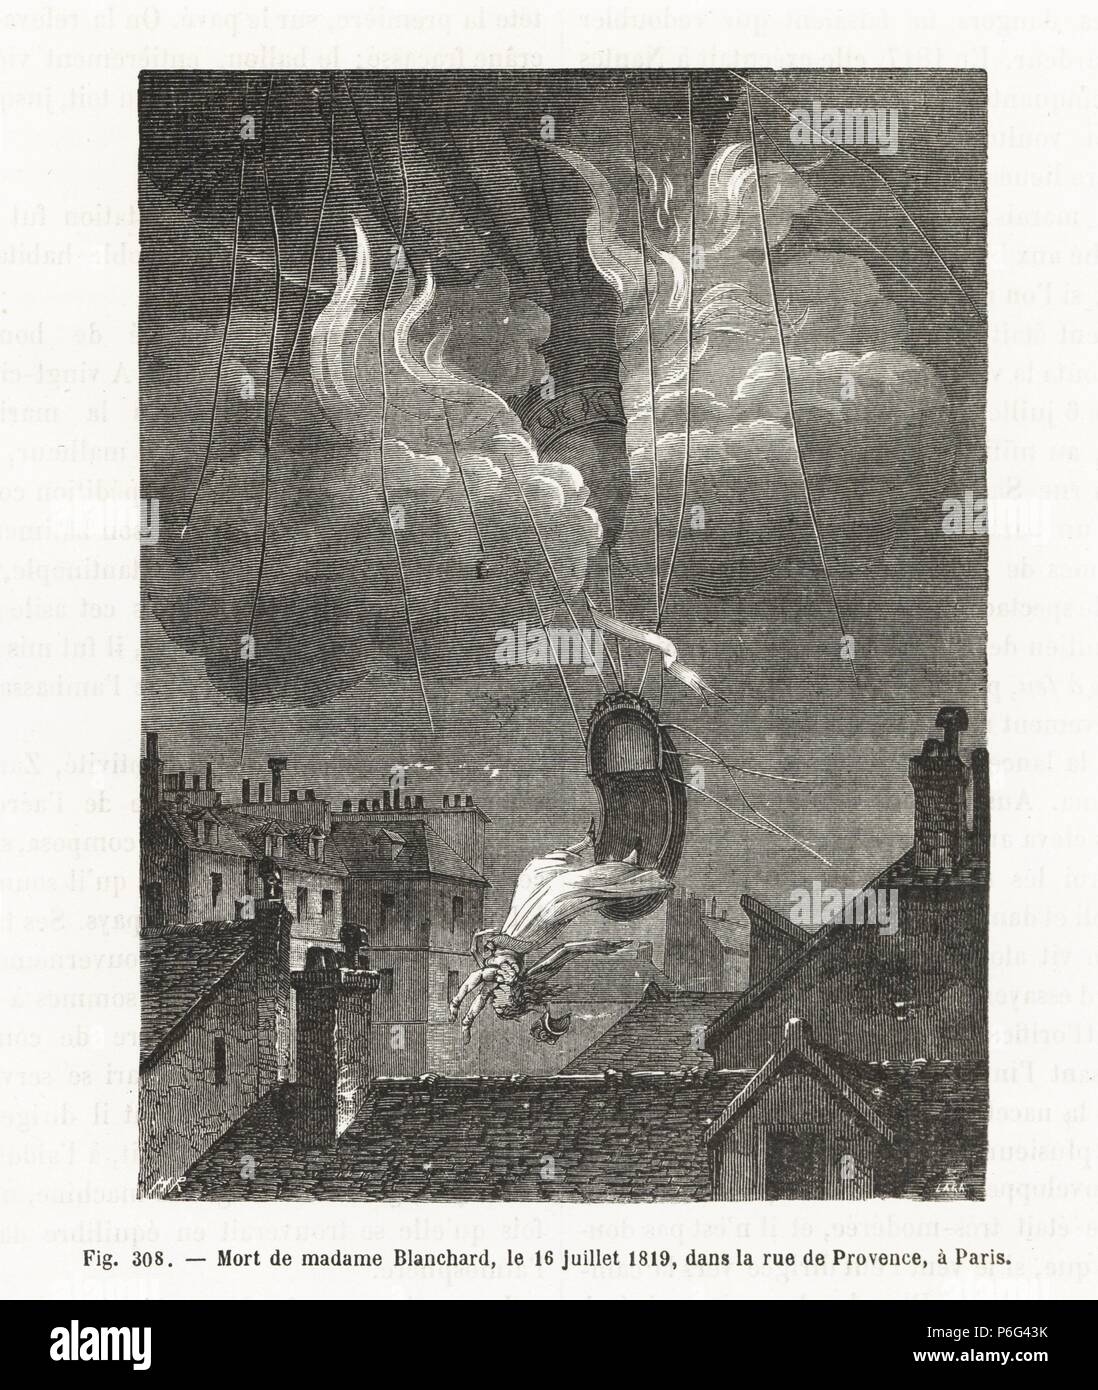 Death of Madame Sophie Blanchard after fireworks ignited her balloon, Paris, 1819. Blanchard (1778-1819), French aeronaut and wife of Jean-Pierre Blanchard. Woodblock engraving by H. Rousseau after SKKI from Louis Figuier's 'Les Merveilles de la Science: Aerostats' (Marvels of Science: Air Balloons), Furne, Jouvet et Cie, Paris, 1868. Stock Photo